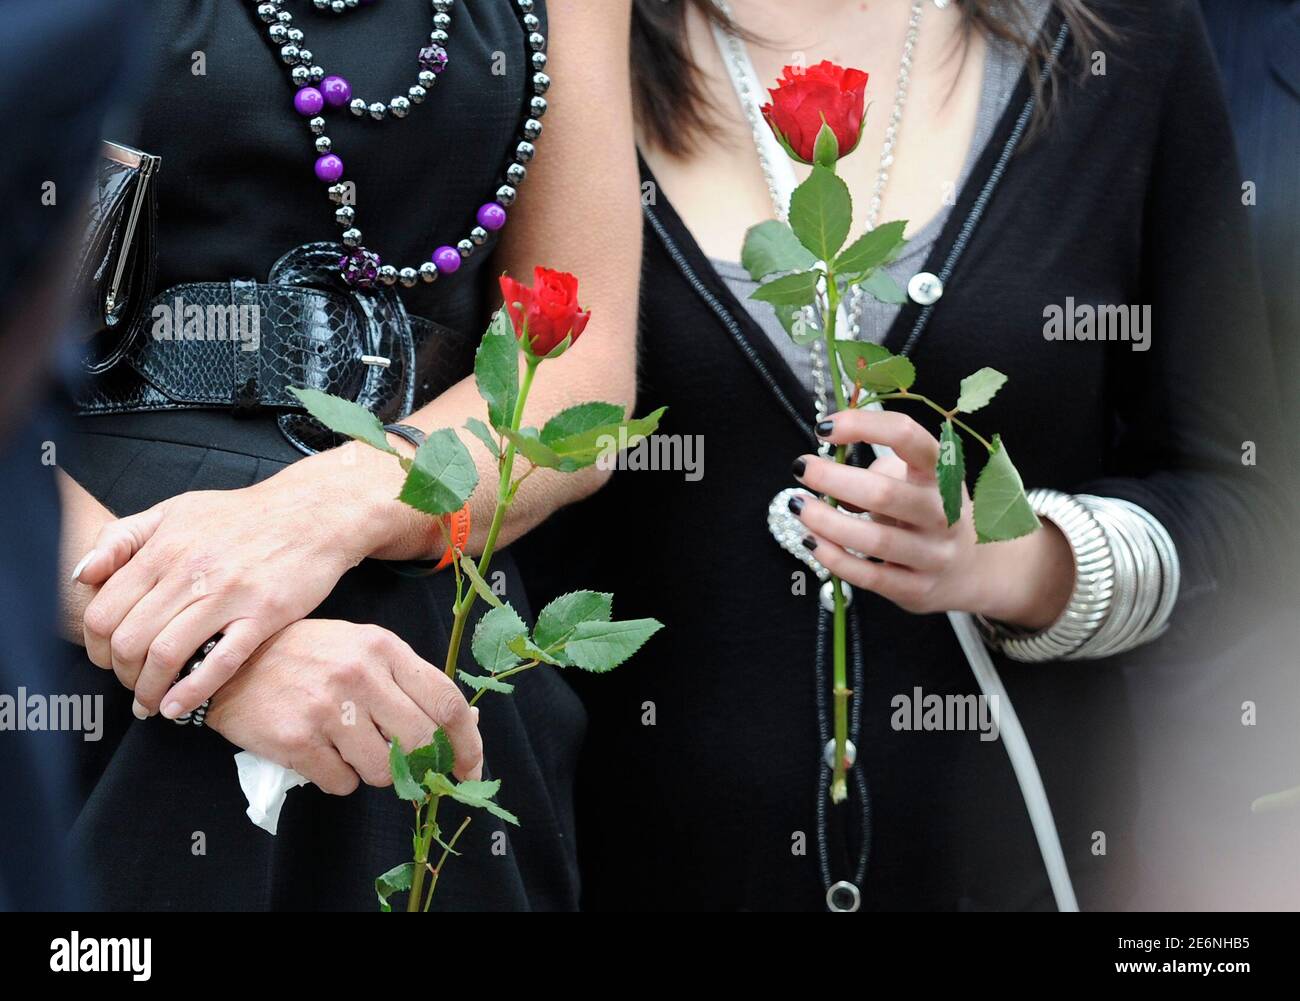 Mourners hold red roses before the funeral of Private Johnathon Young of the 3rd Battalion The Yorkshire Regiment (Duke of Wellington's) at Holy Trinity church in Hull, northern England September 16, 2009.  Private Young died in an explosion while on foot patrol in Helmand province, Afghanistan, on August 20.    REUTERS/Nigel Roddis (BRITAIN OBITUARY CONFLICT) Stock Photo